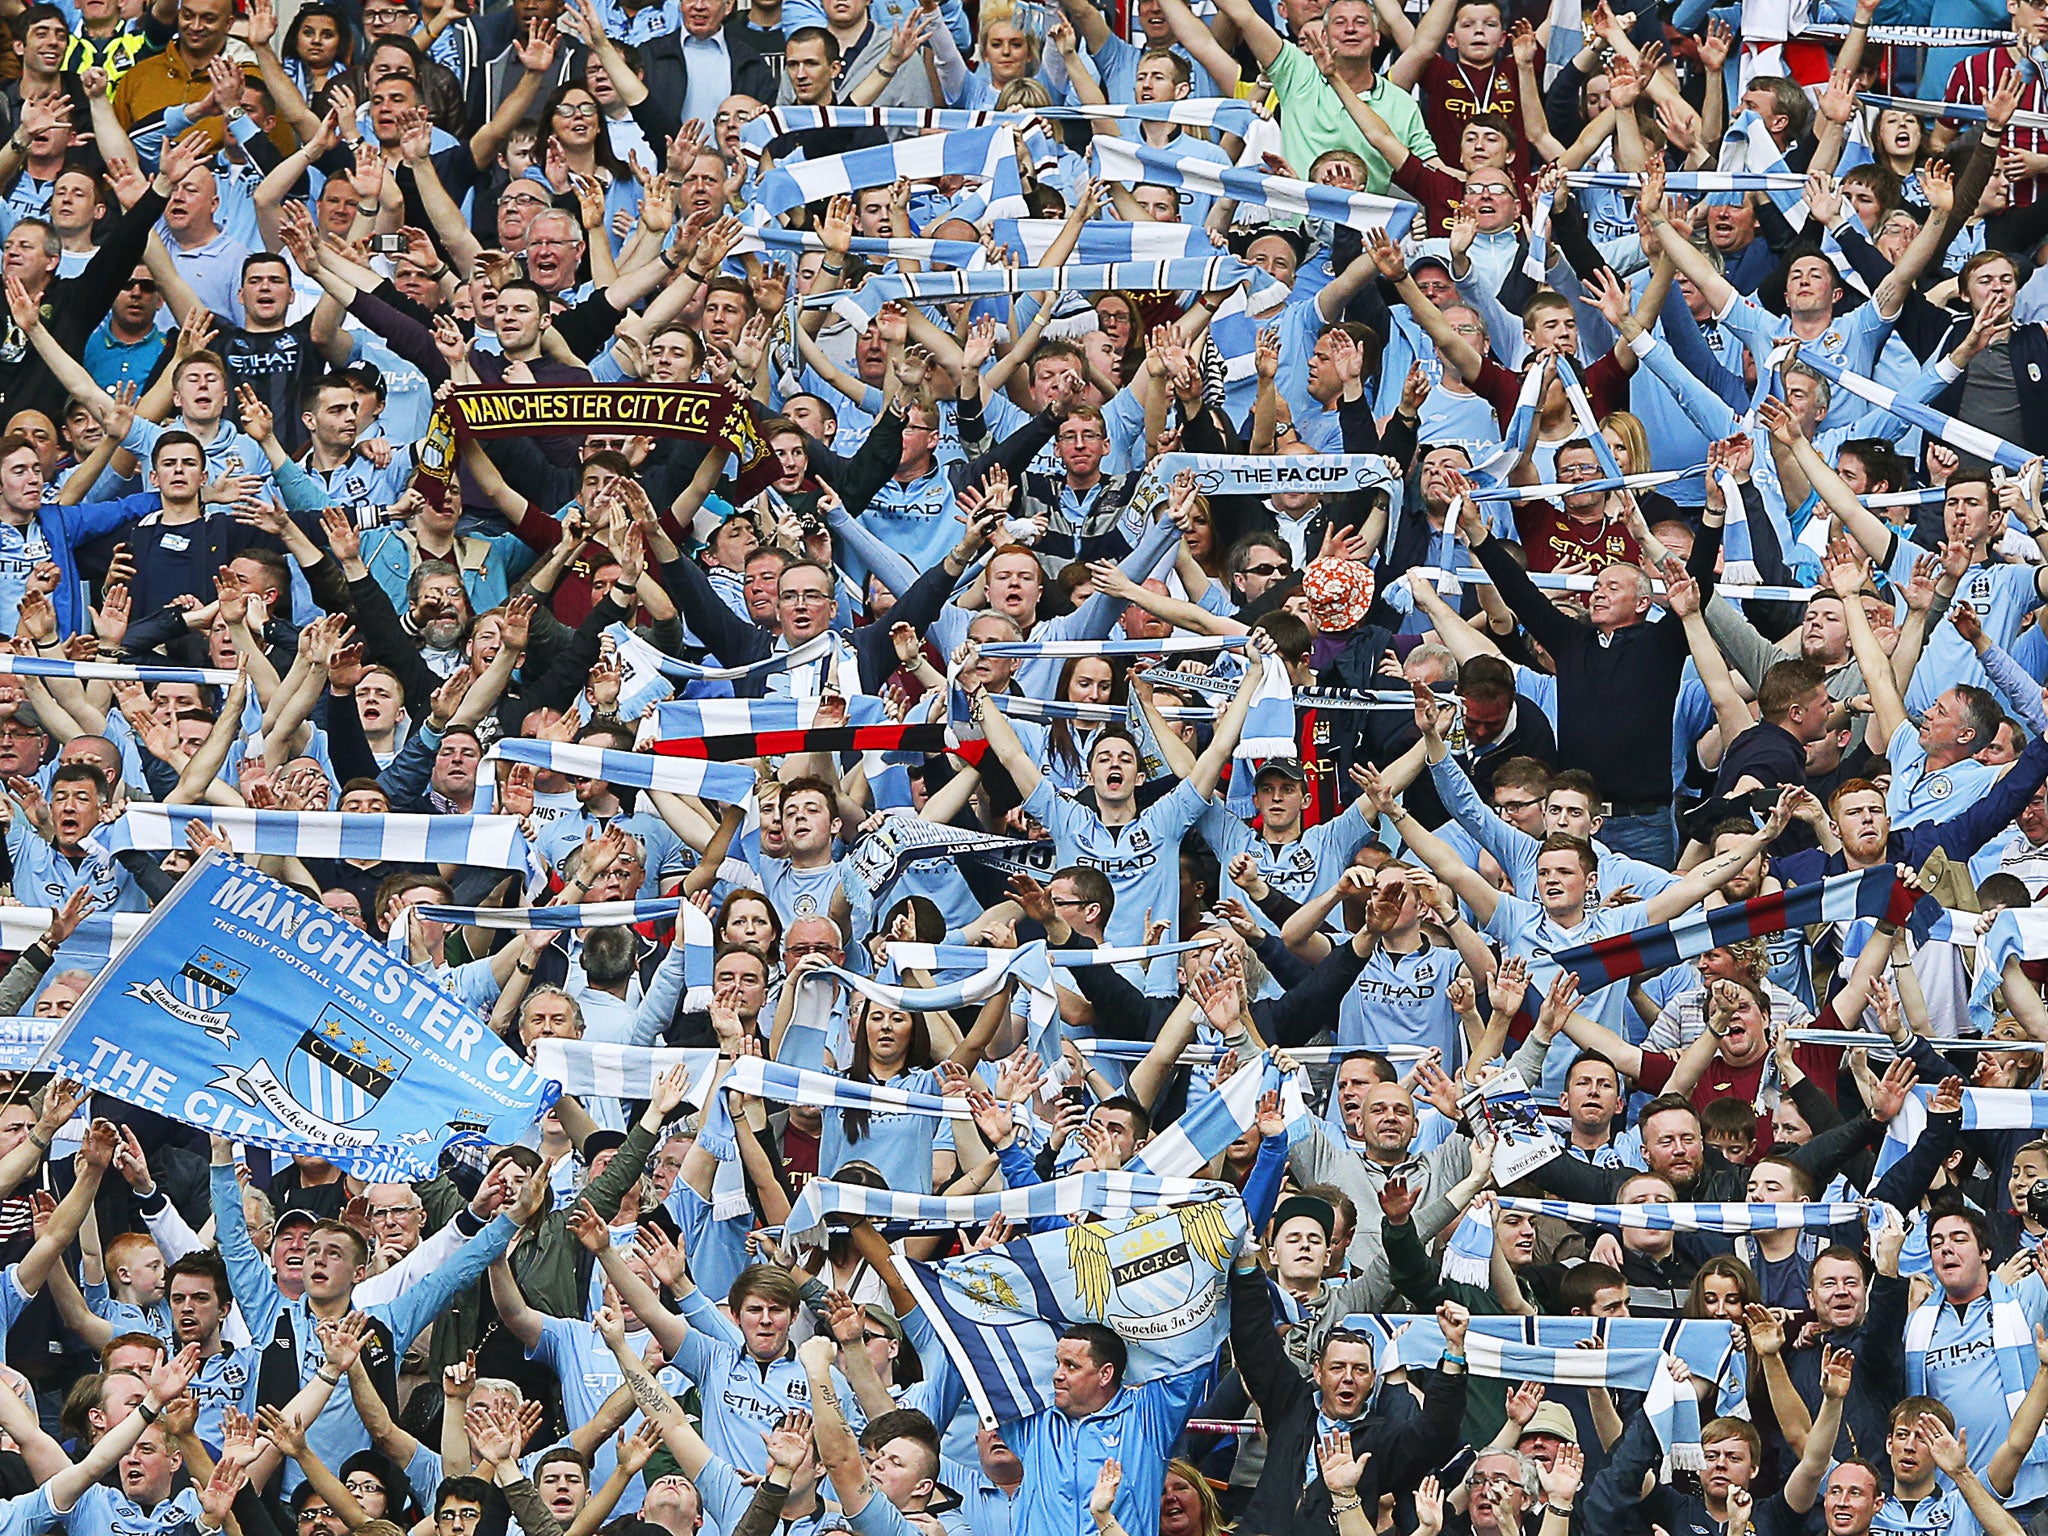 Manchester City fans have started a petition against Viagogo